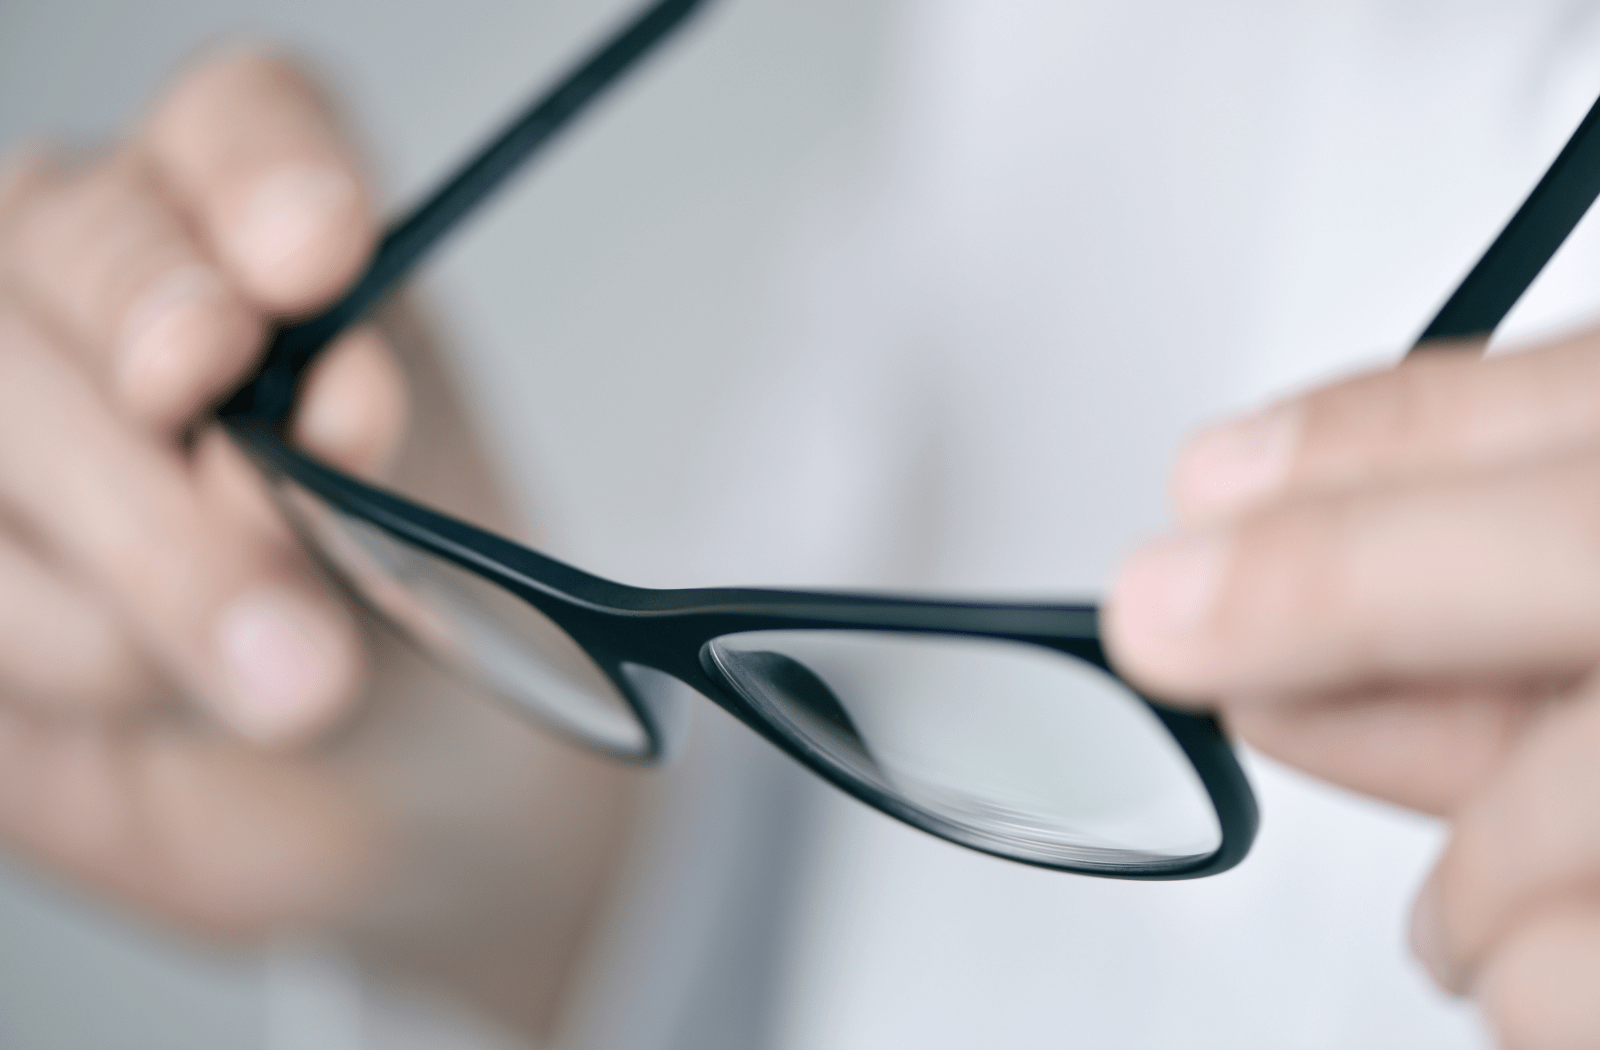 A close up image of a pair of black-rimmed glasses